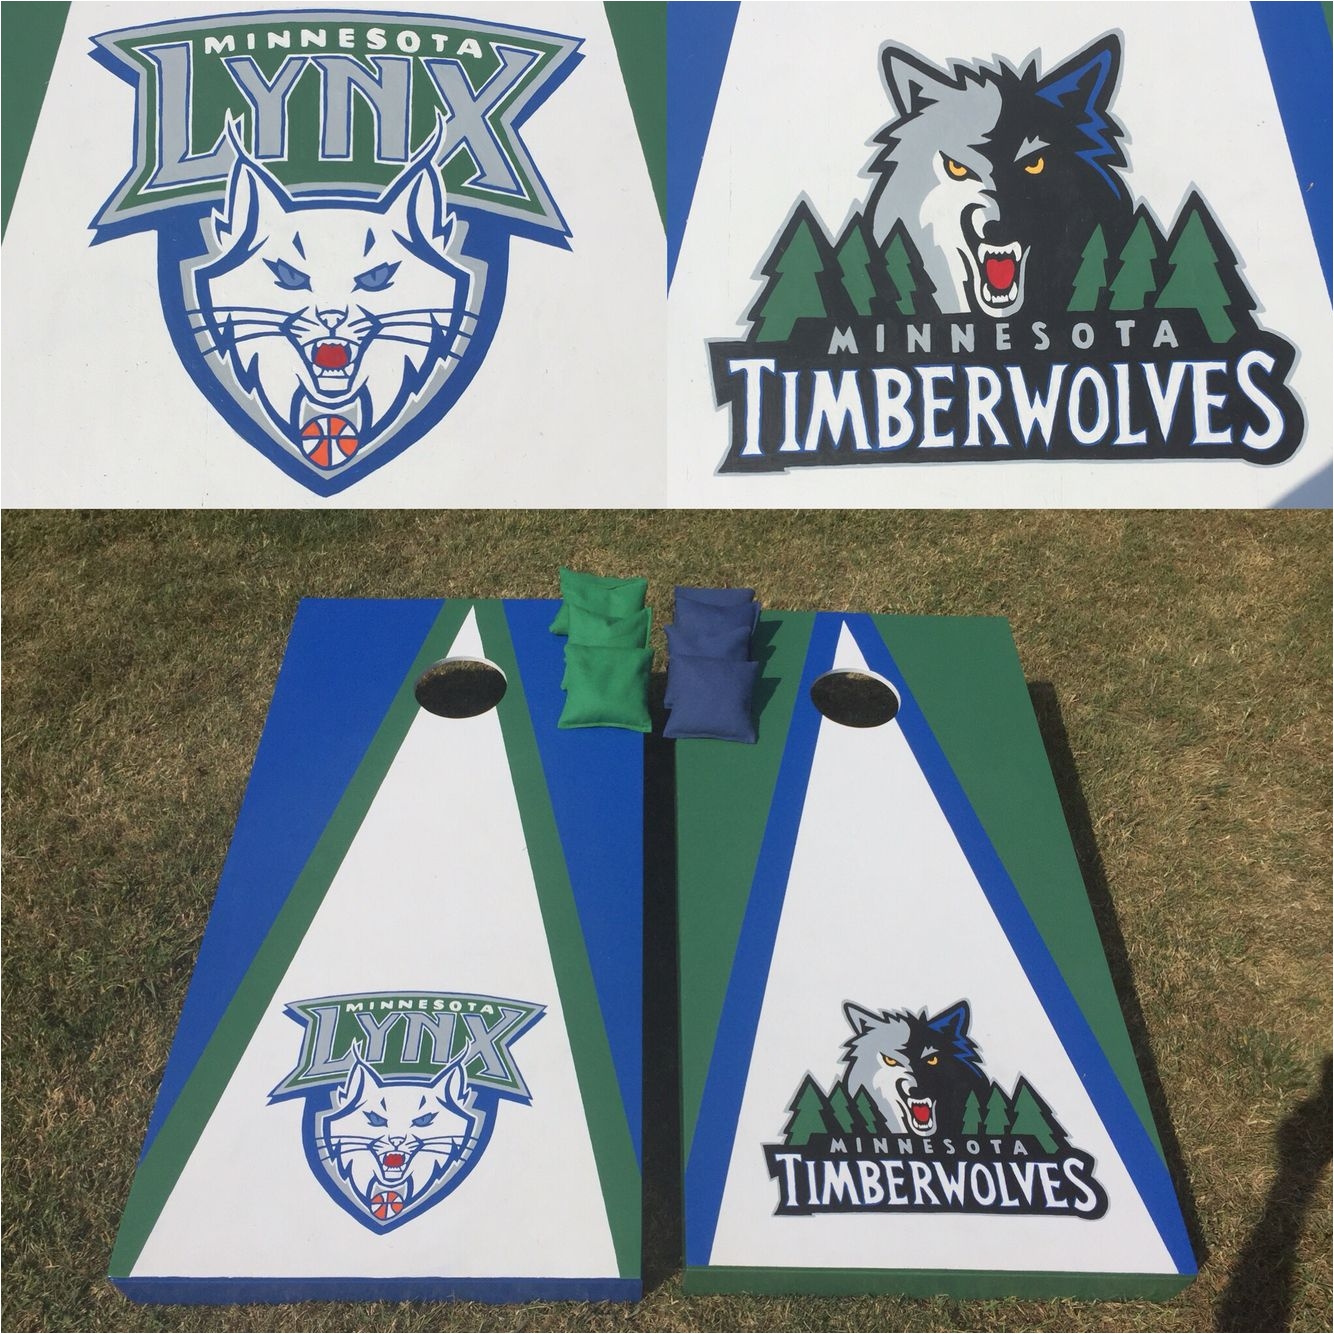 cornhole boards customized any way you want them hand painted monogram or team logo